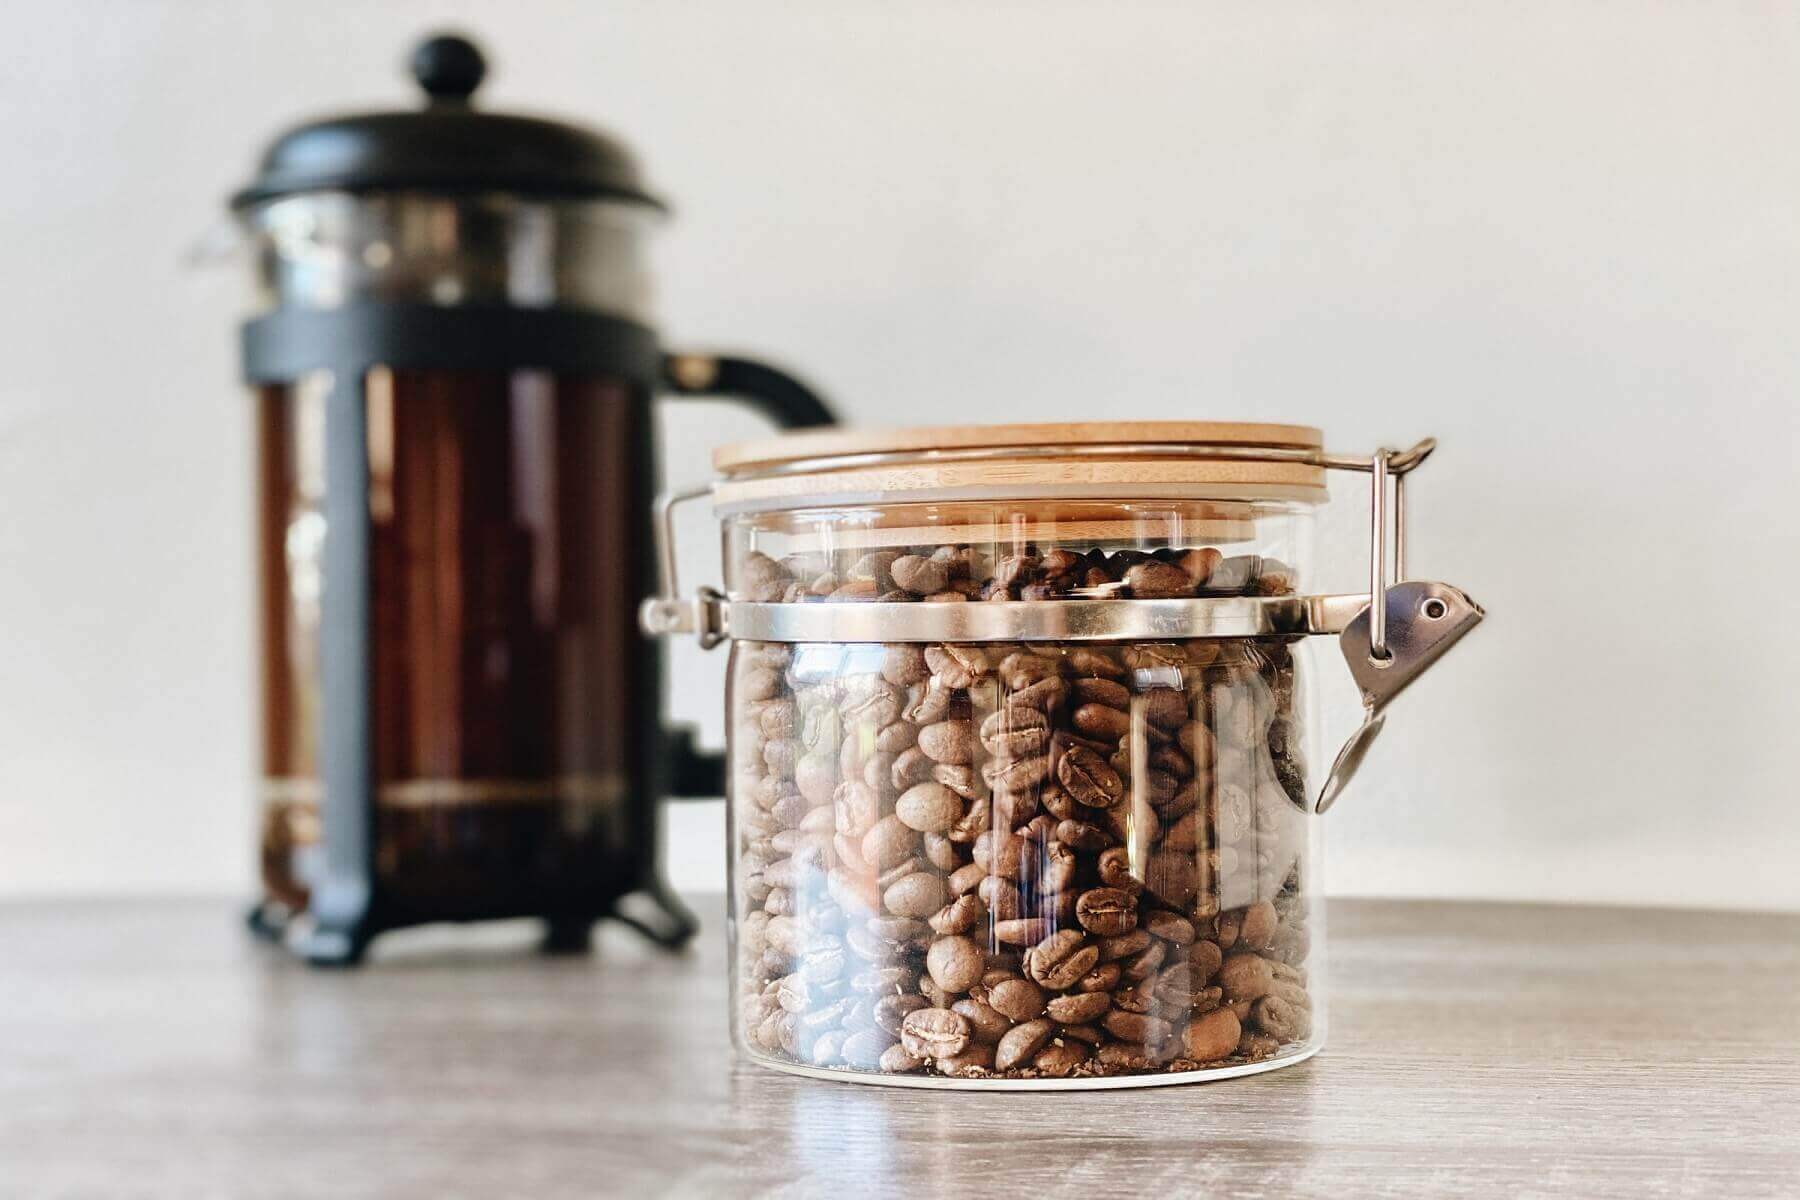 you can store coffee beans inside air-tight glass jar as in this photo